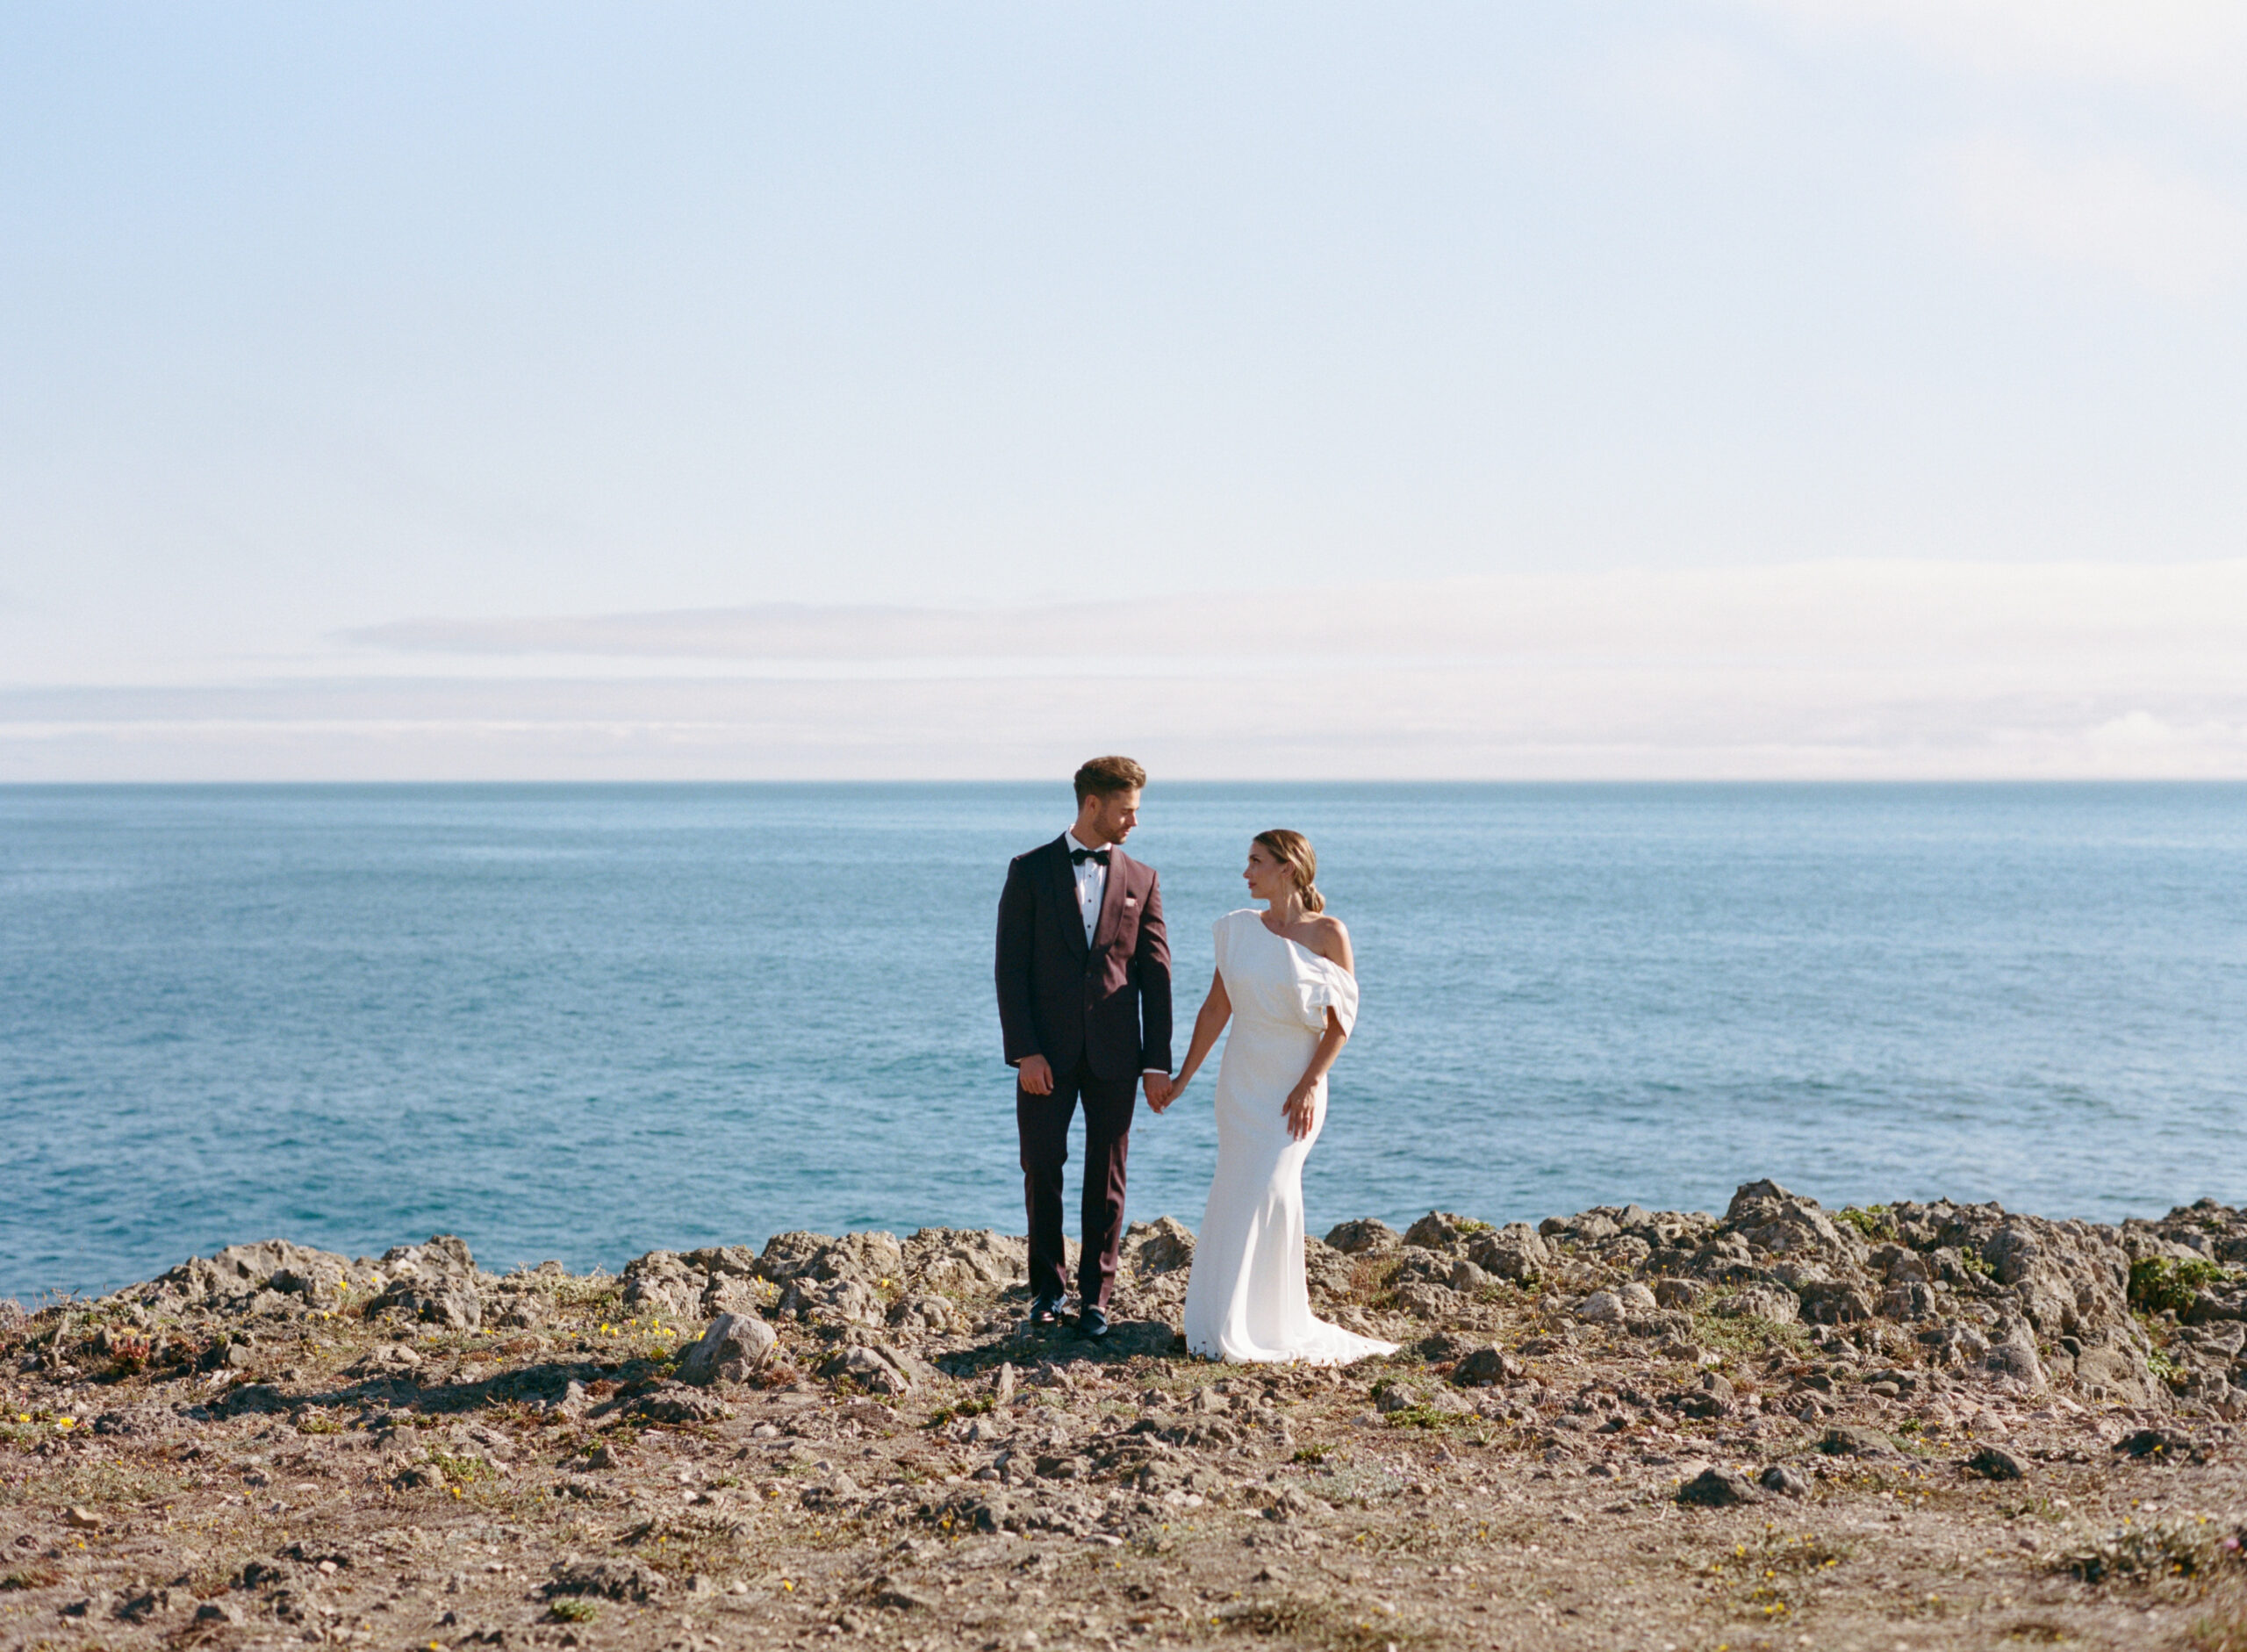 A couple post wedding ceremony standing on the cliffs of Sea Ranch overlooking the ocean after their California elopement